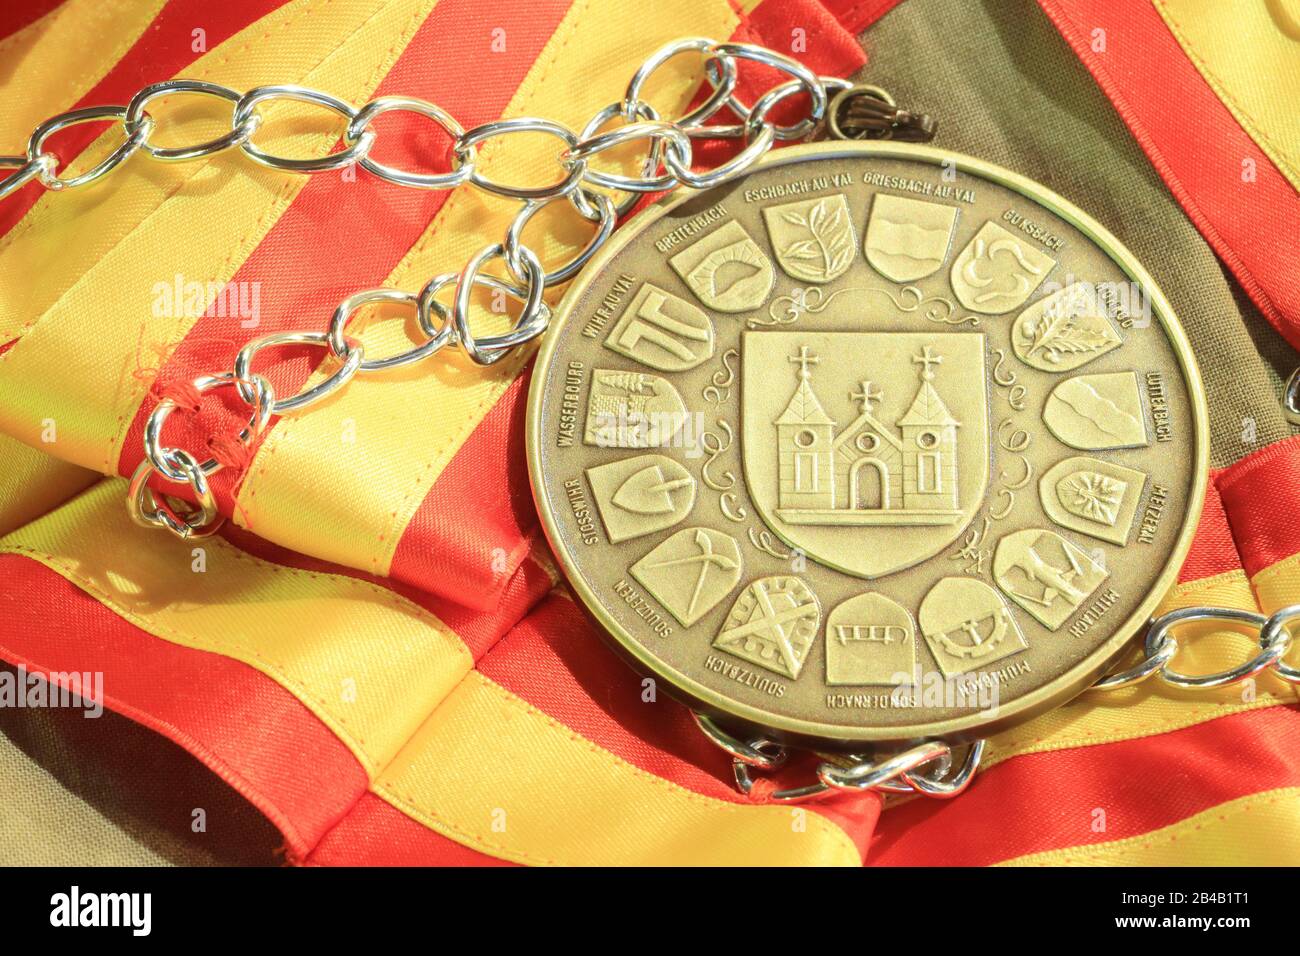 France, Haut Rhin, Munster, brotherhood Saint Gregoire du Taste Cheese from the valley of Munster, their medal with the badge of the city of Munster and the 15 municipalities of the canton Stock Photo